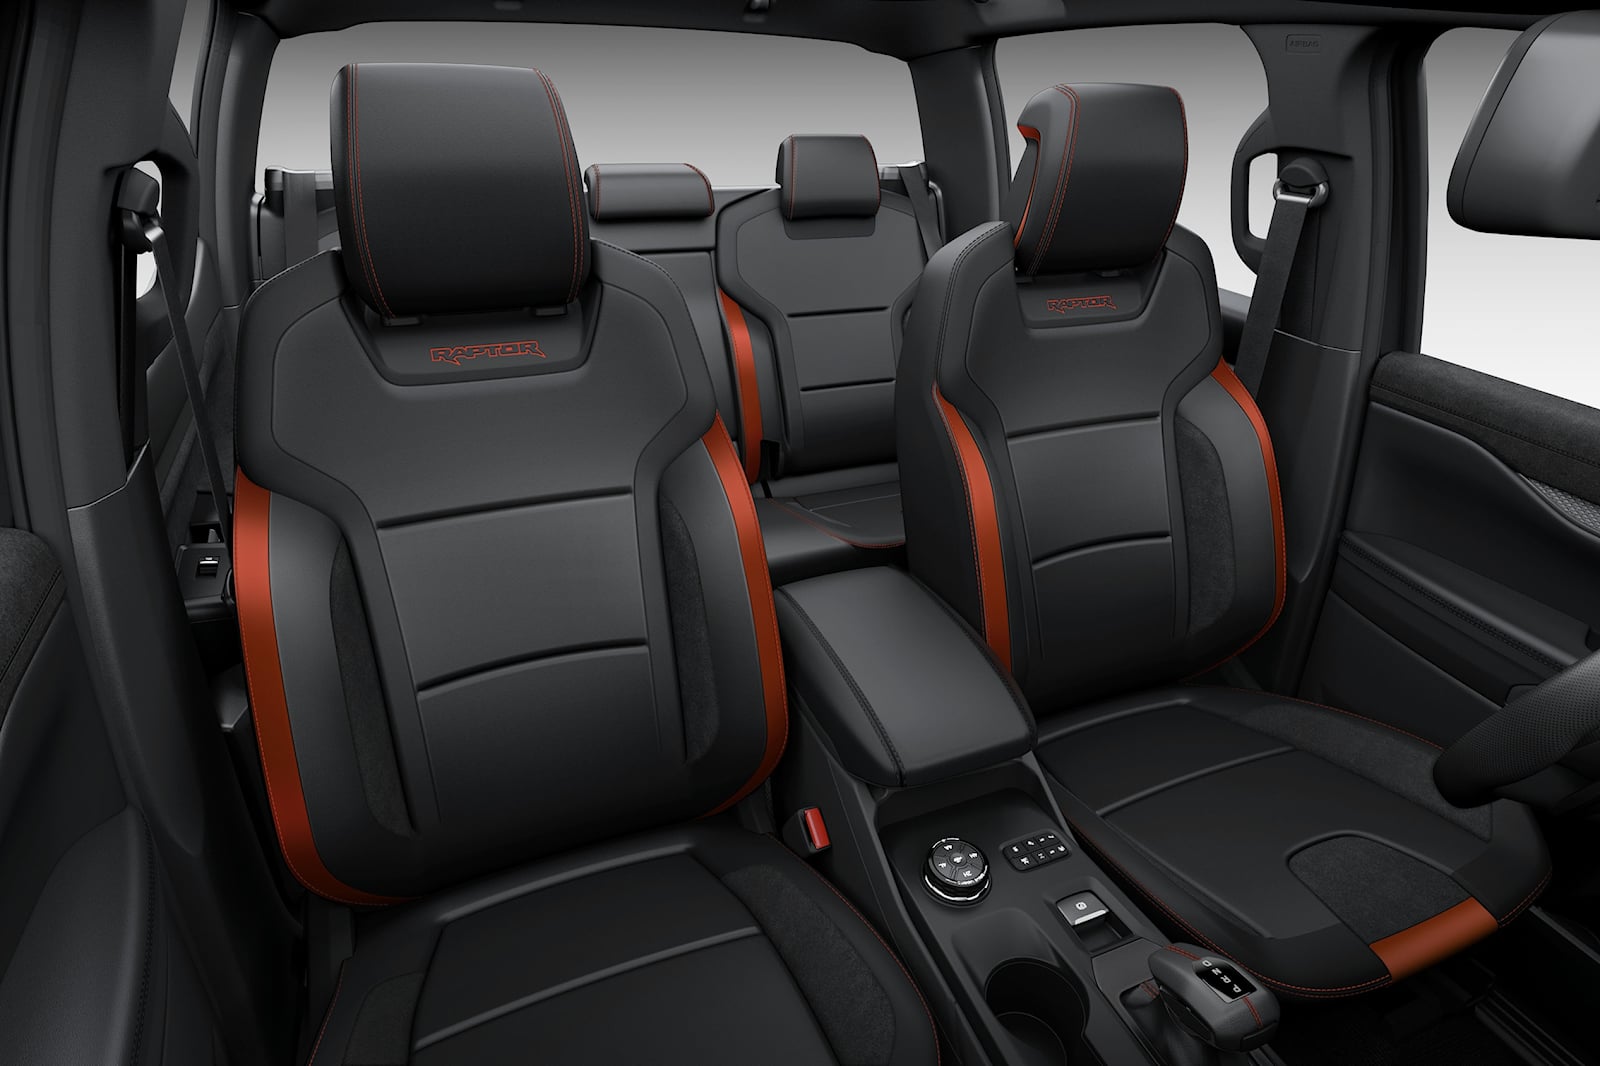 Interior Features of the 2023 Ford Ranger